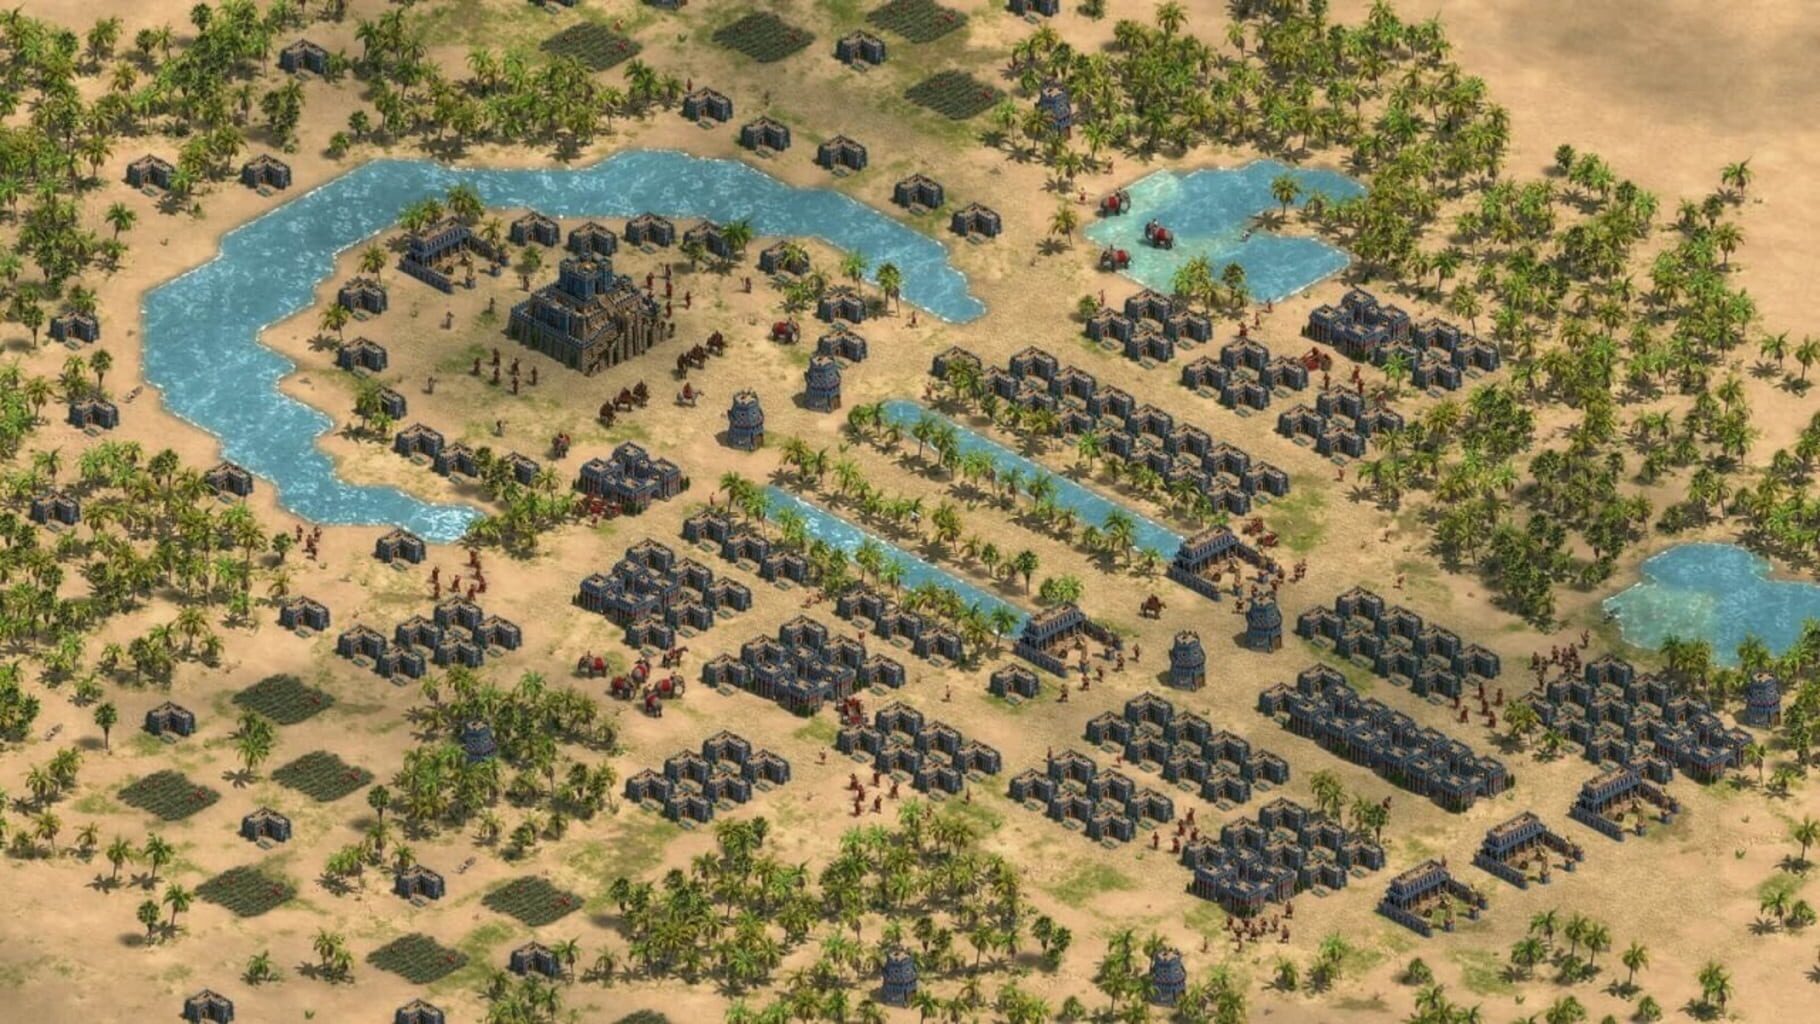 Screenshot for Age of Empires: Definitive Edition